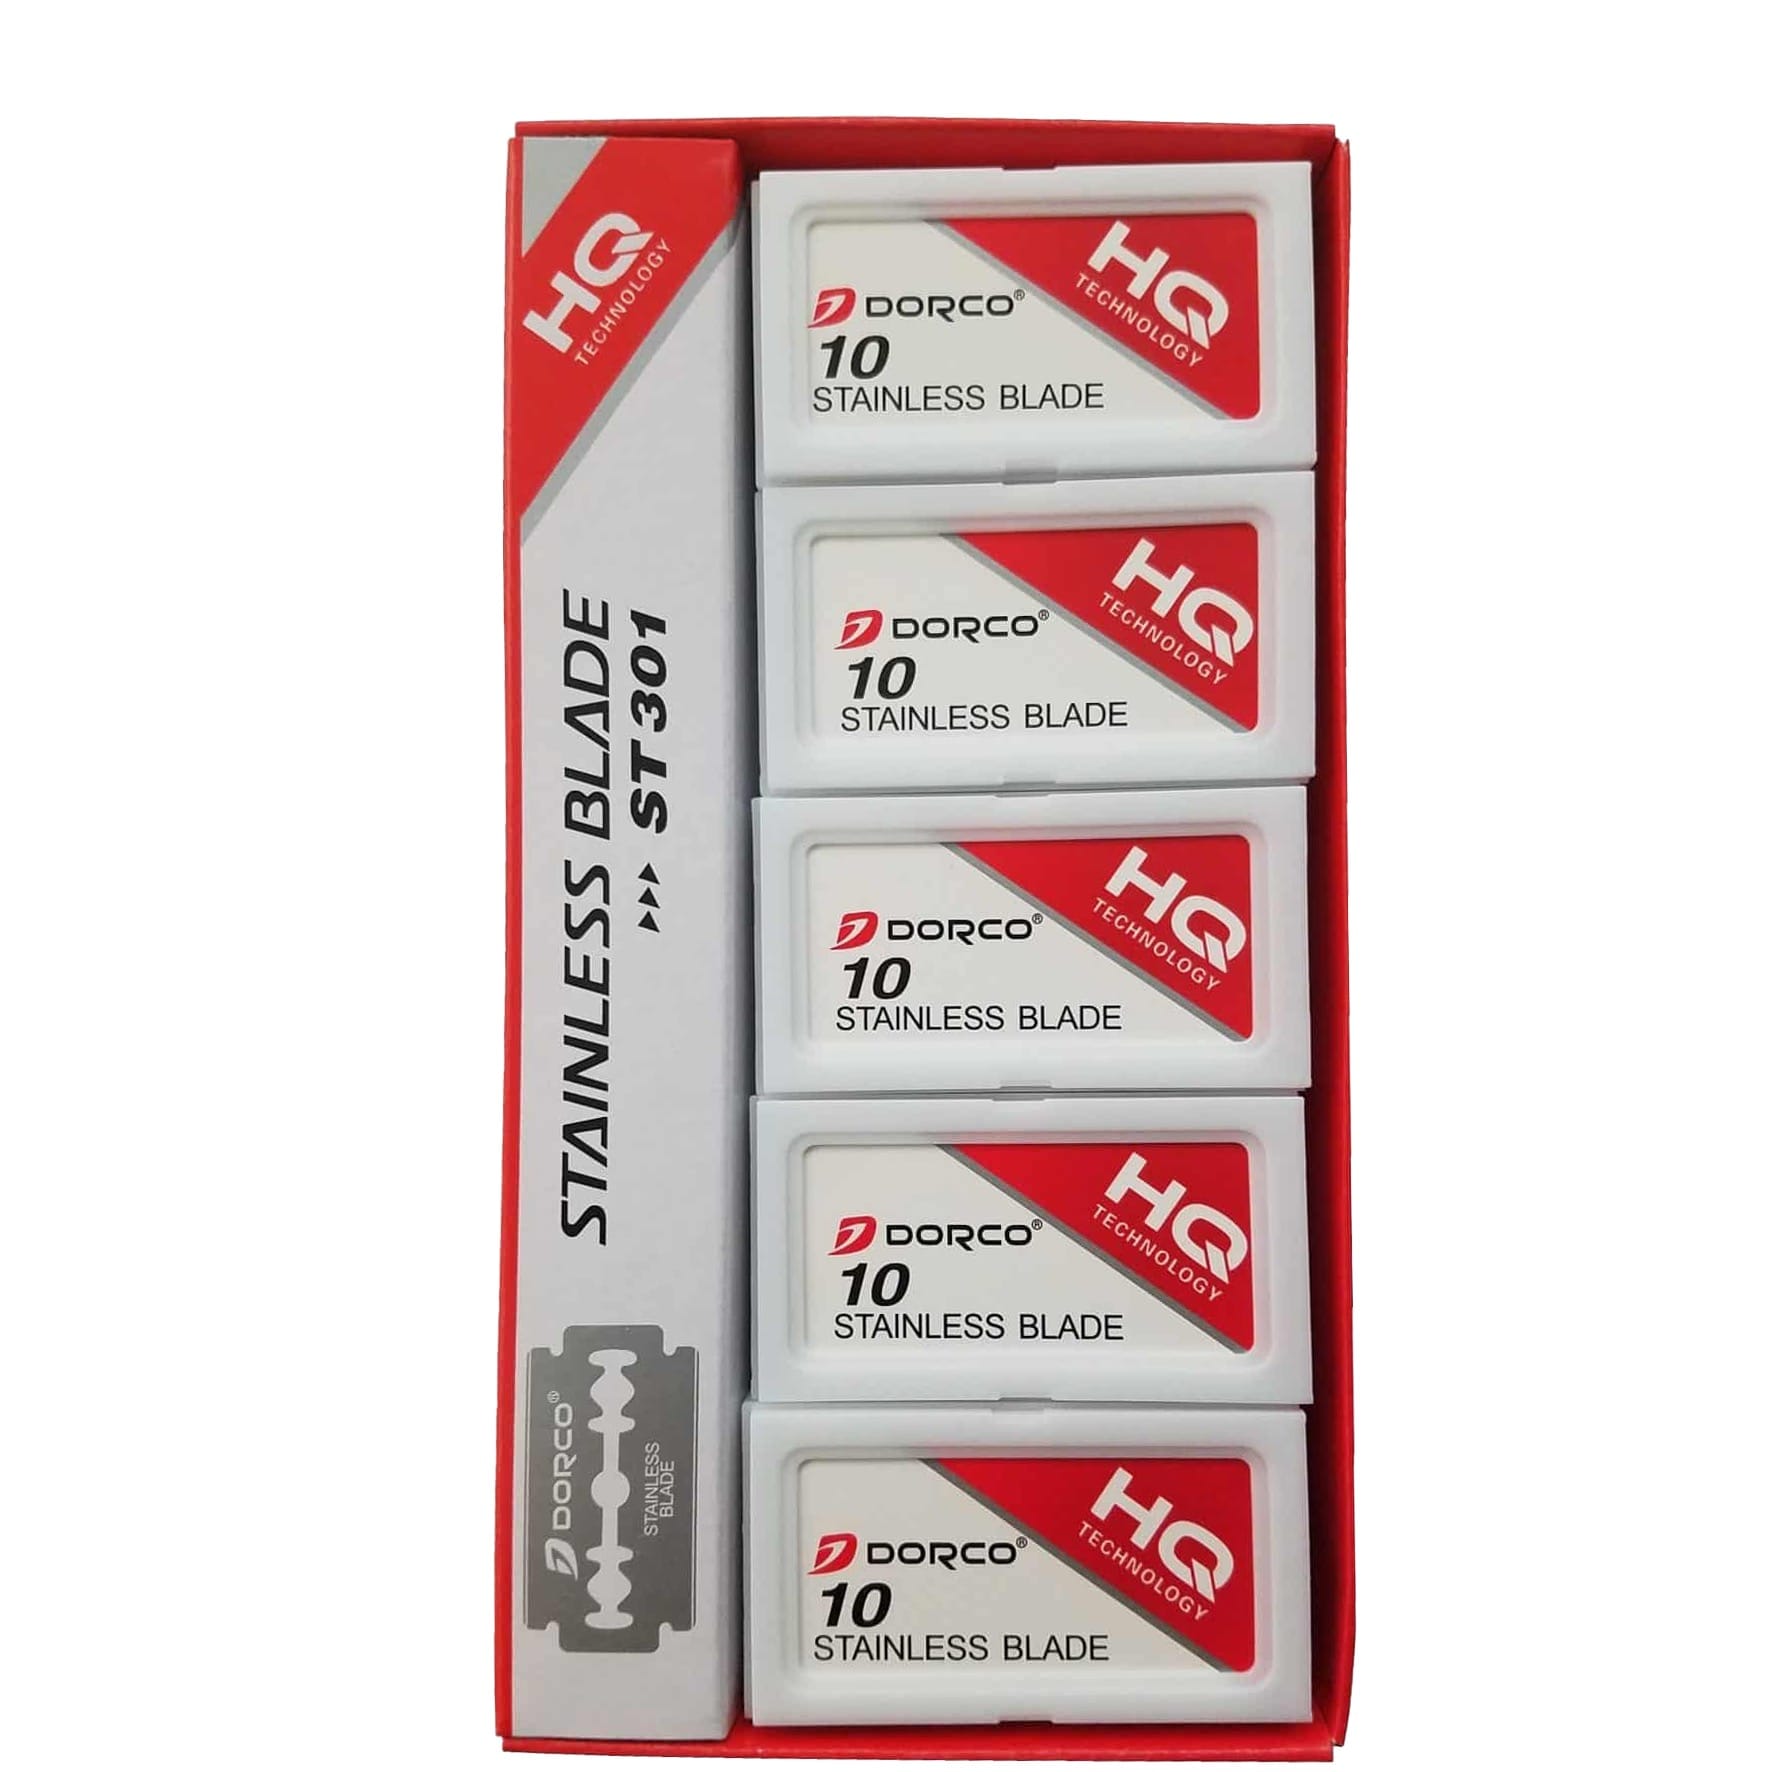 Box - Dorco Double Edge Blades Stainless Platinum Coated